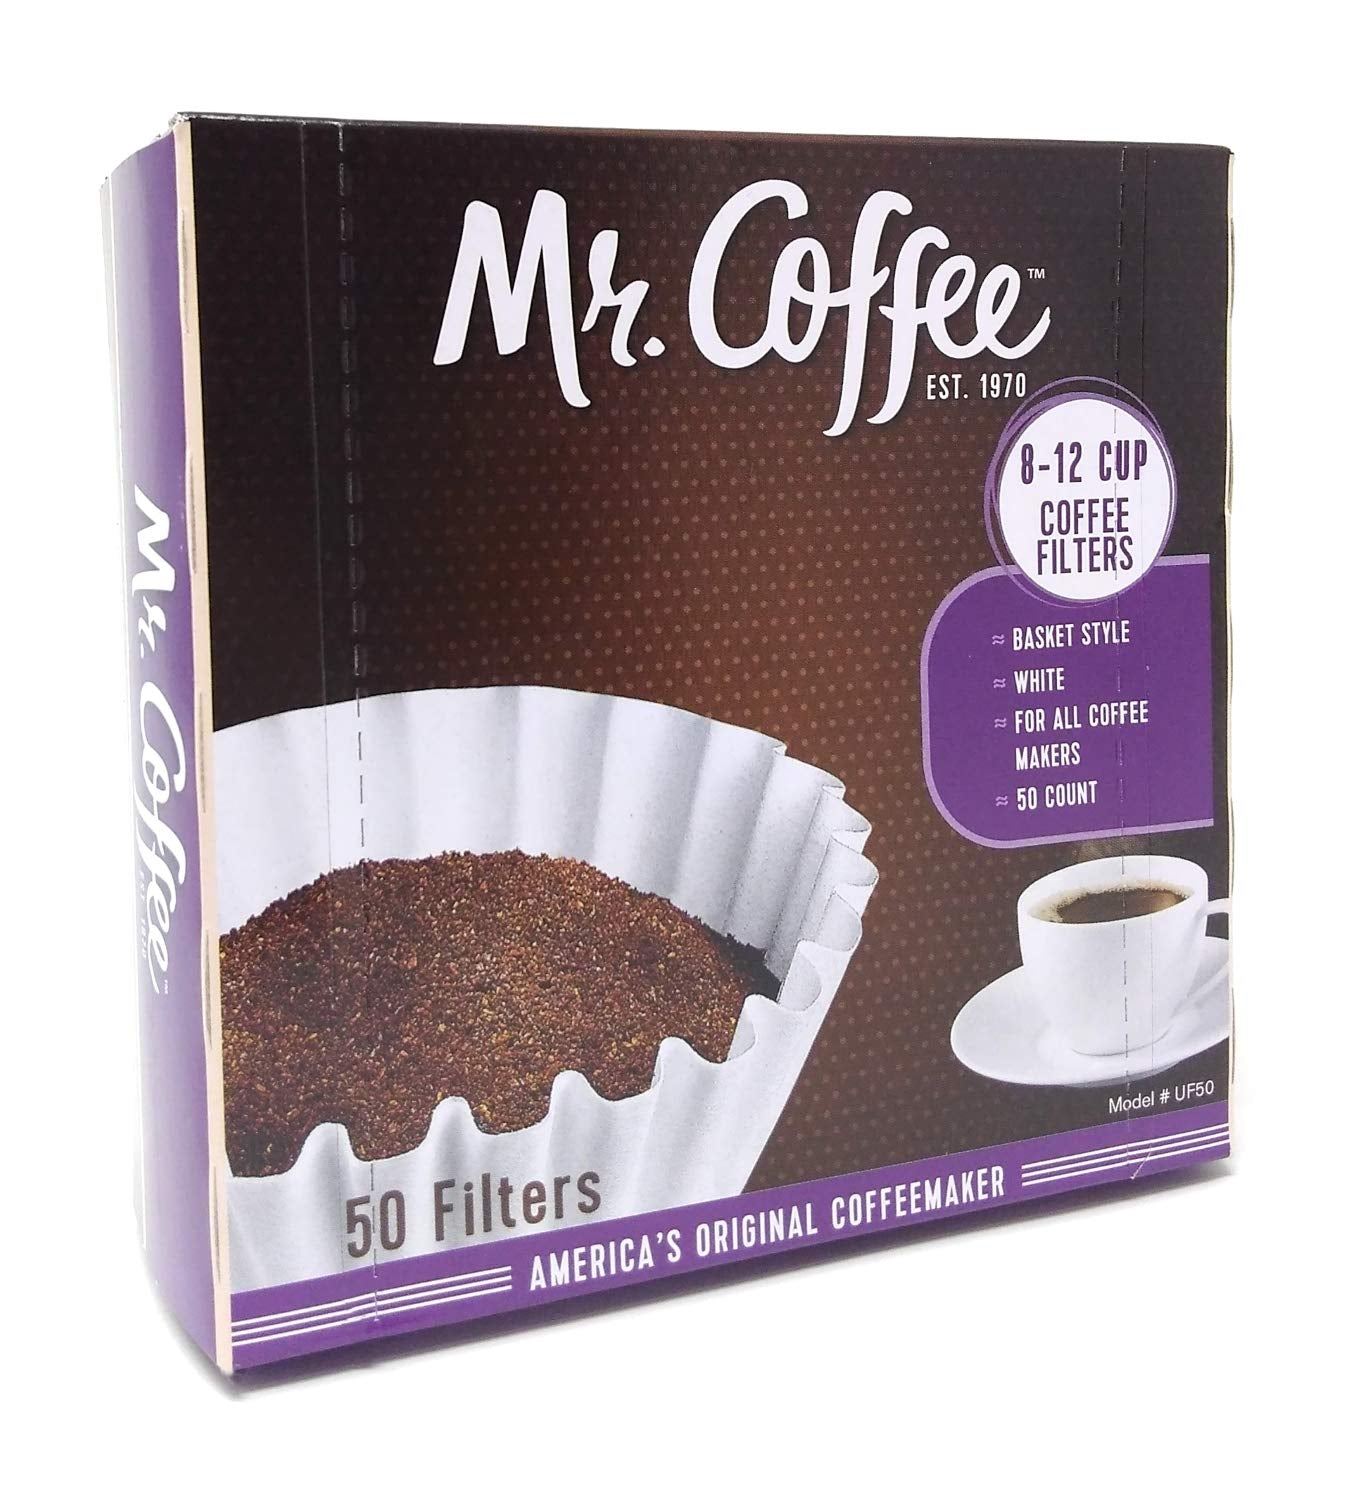 Mr. Coffee 8-12 Cup Coffee Filters 50 Count